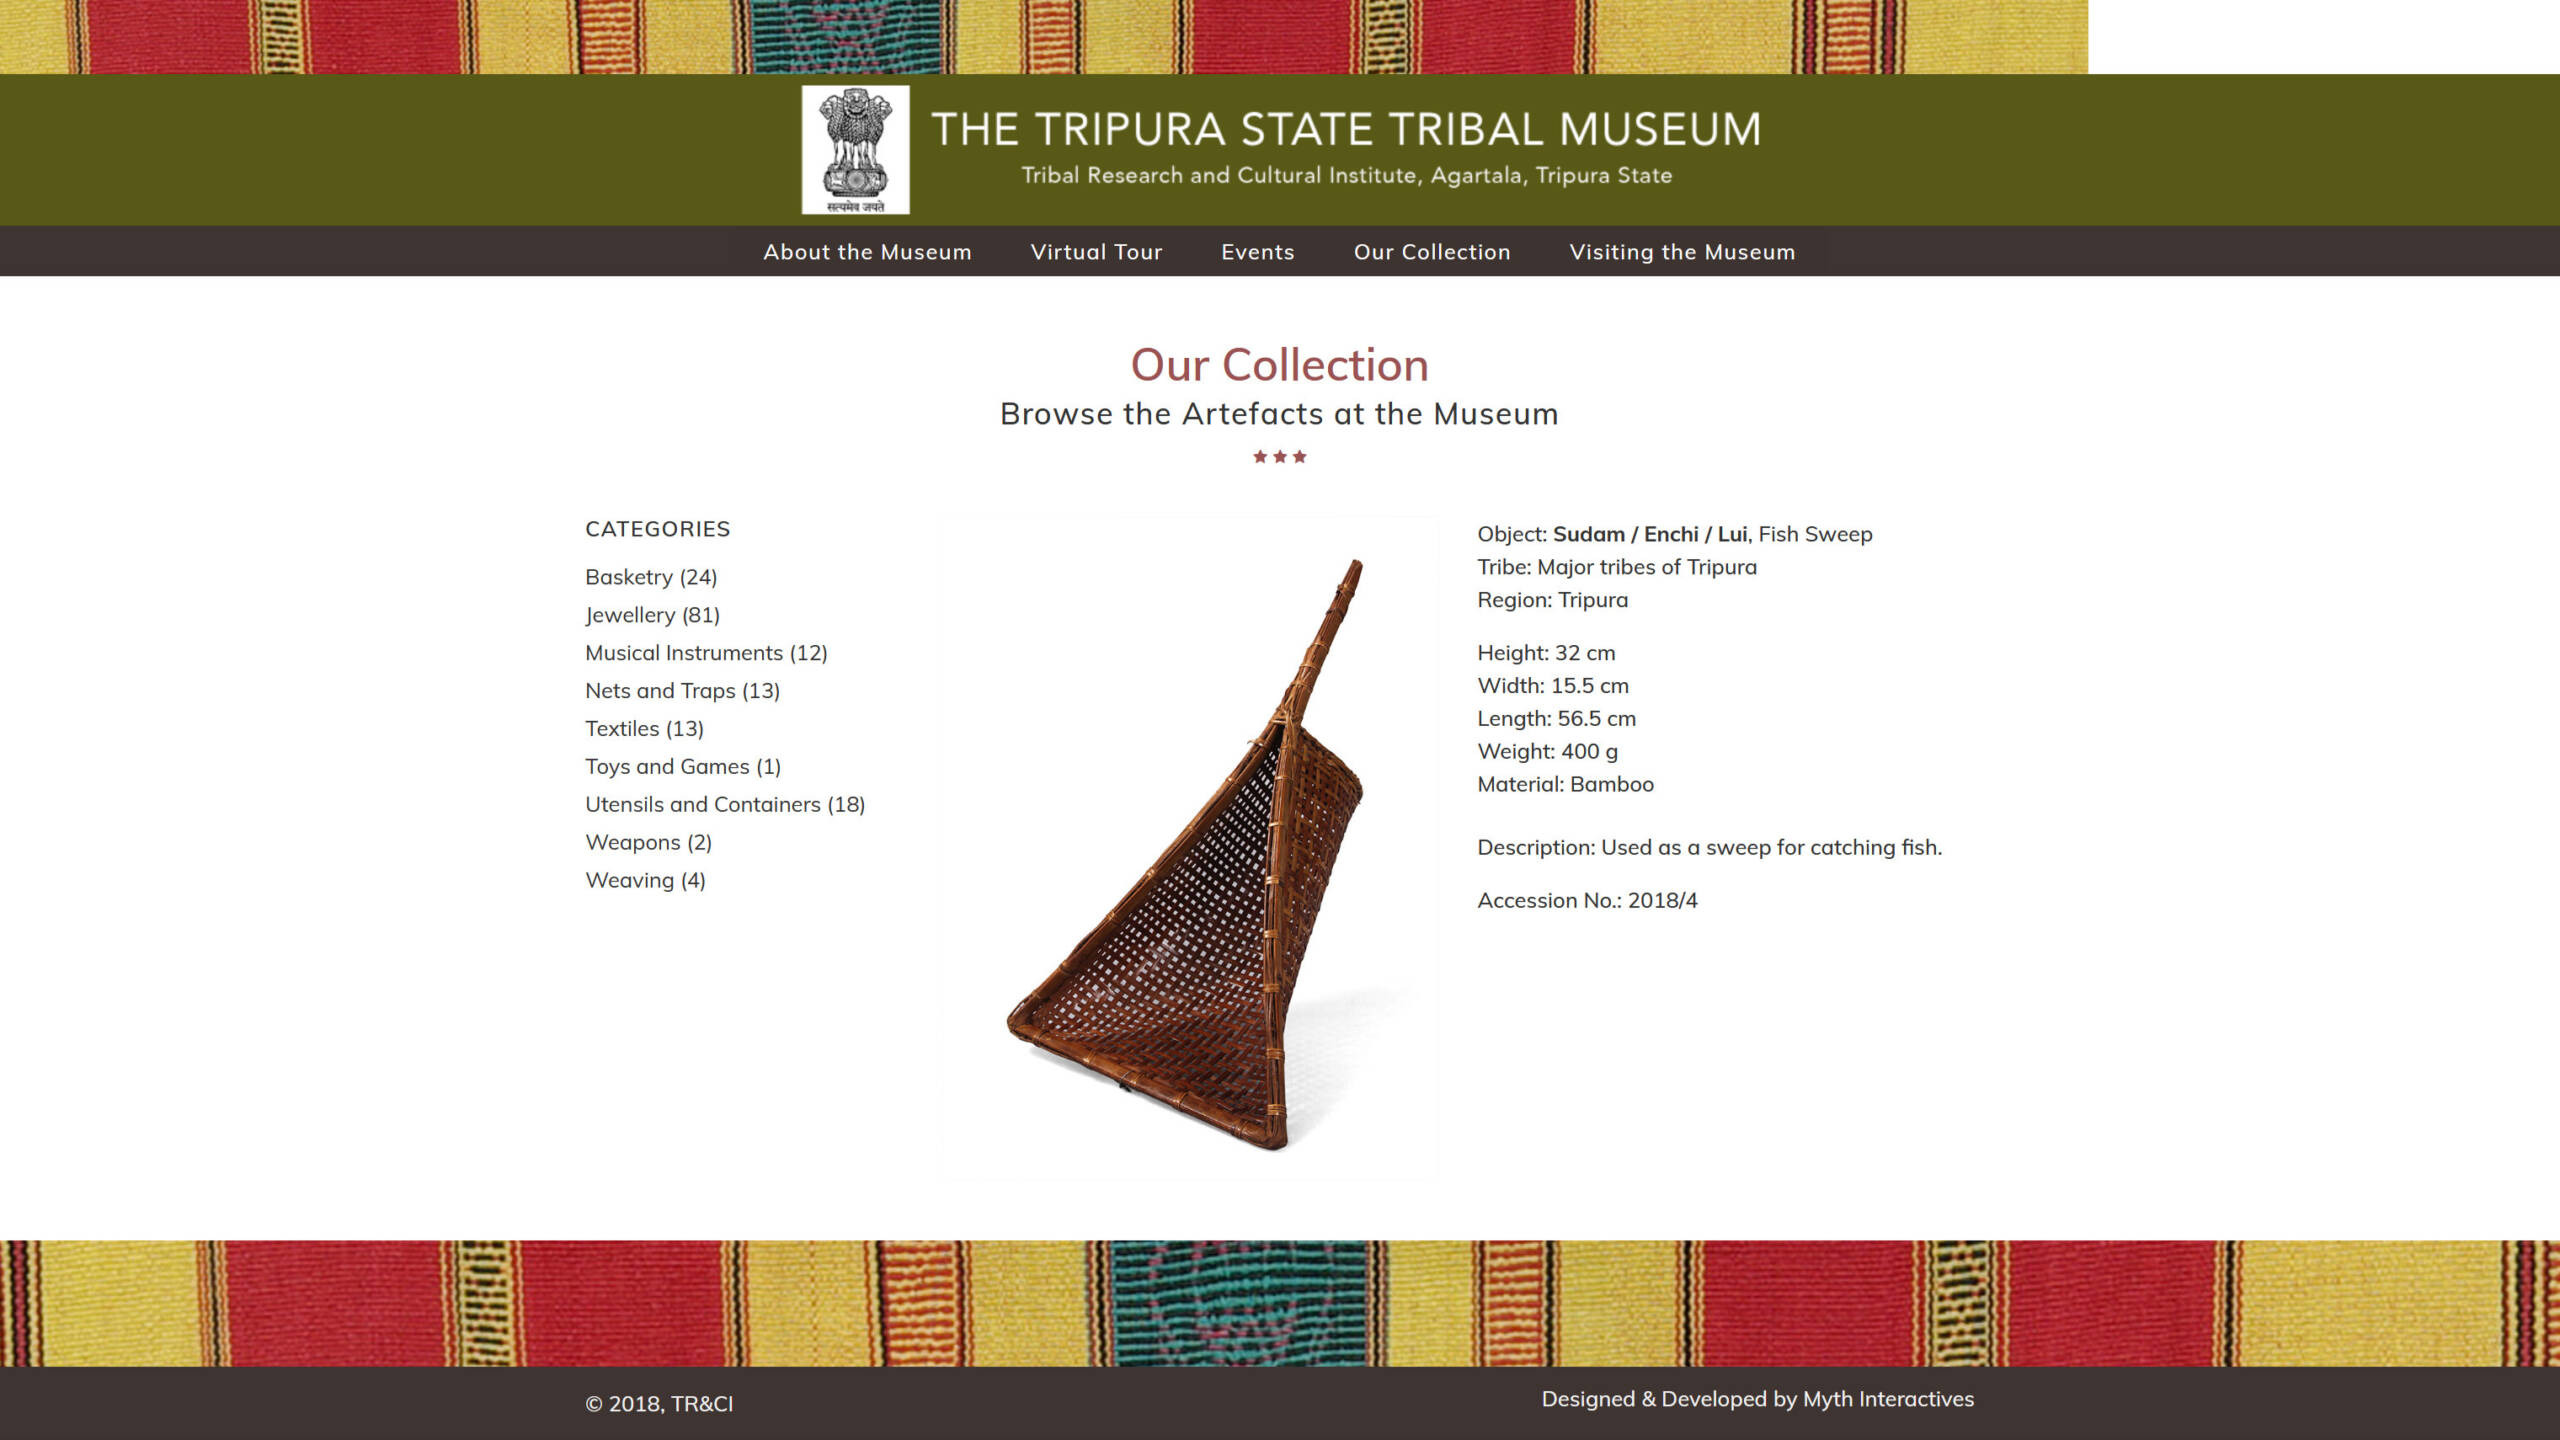 Our Collection page of the website of The Tripura State Tribal Museum